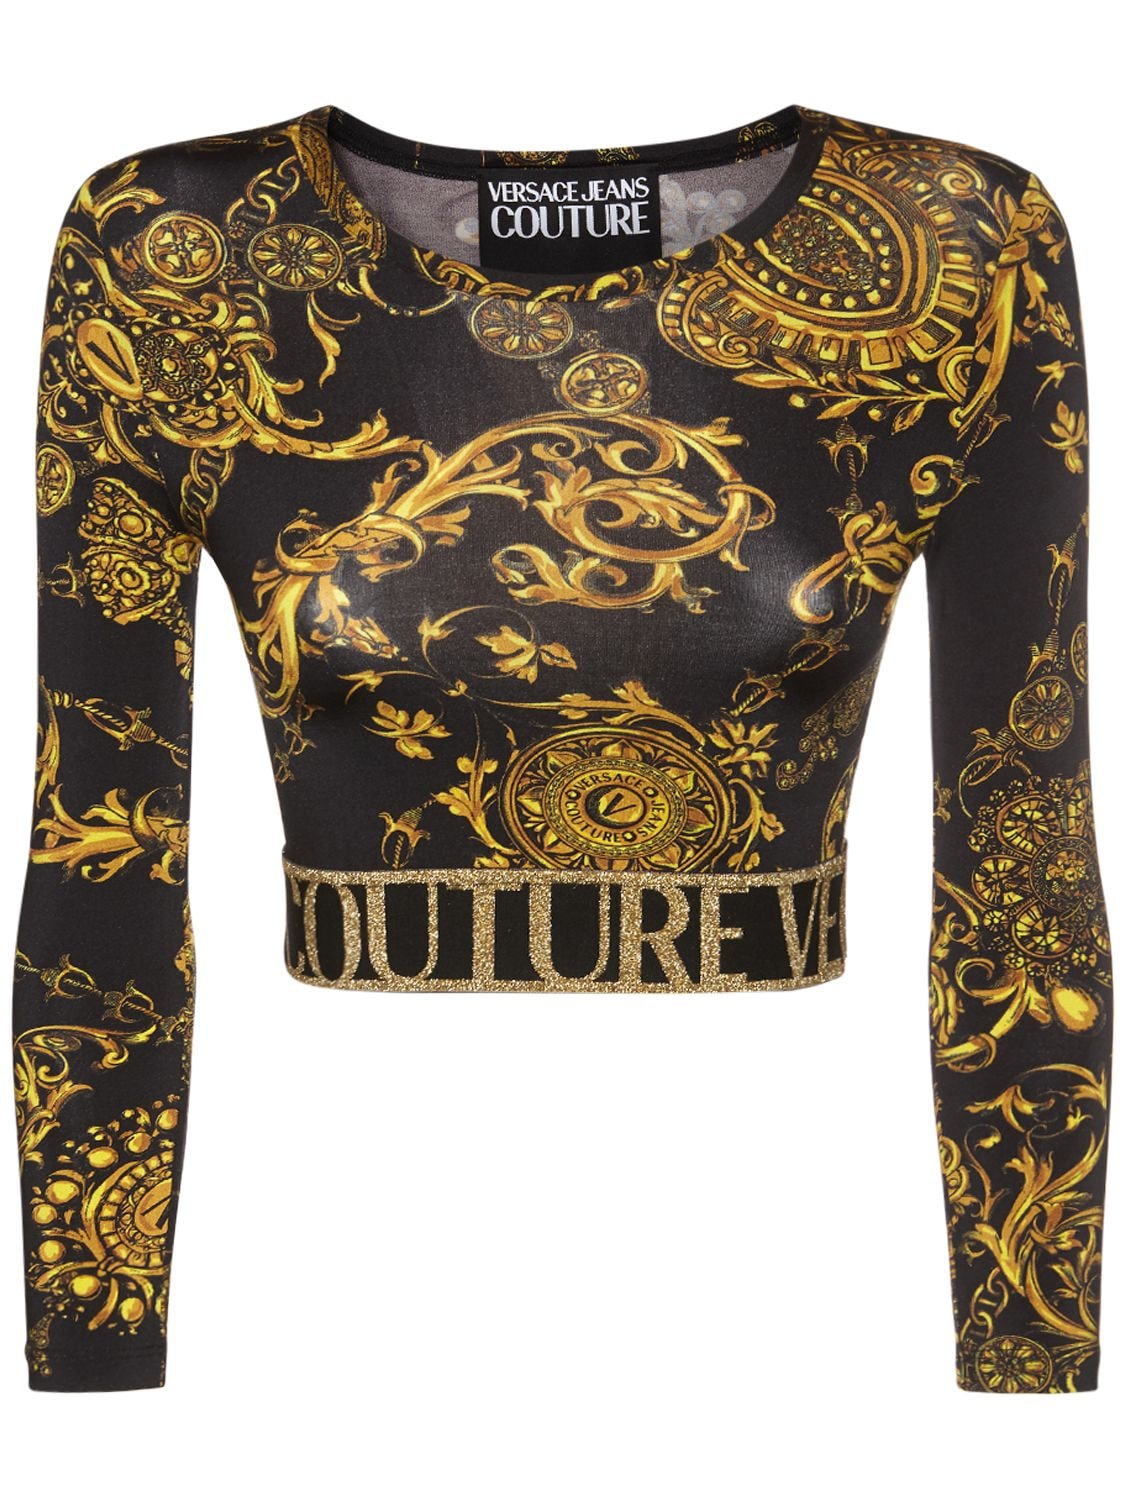 Versace Jeans Couture - Baroque print jersey cropped top - Black/Gold ...